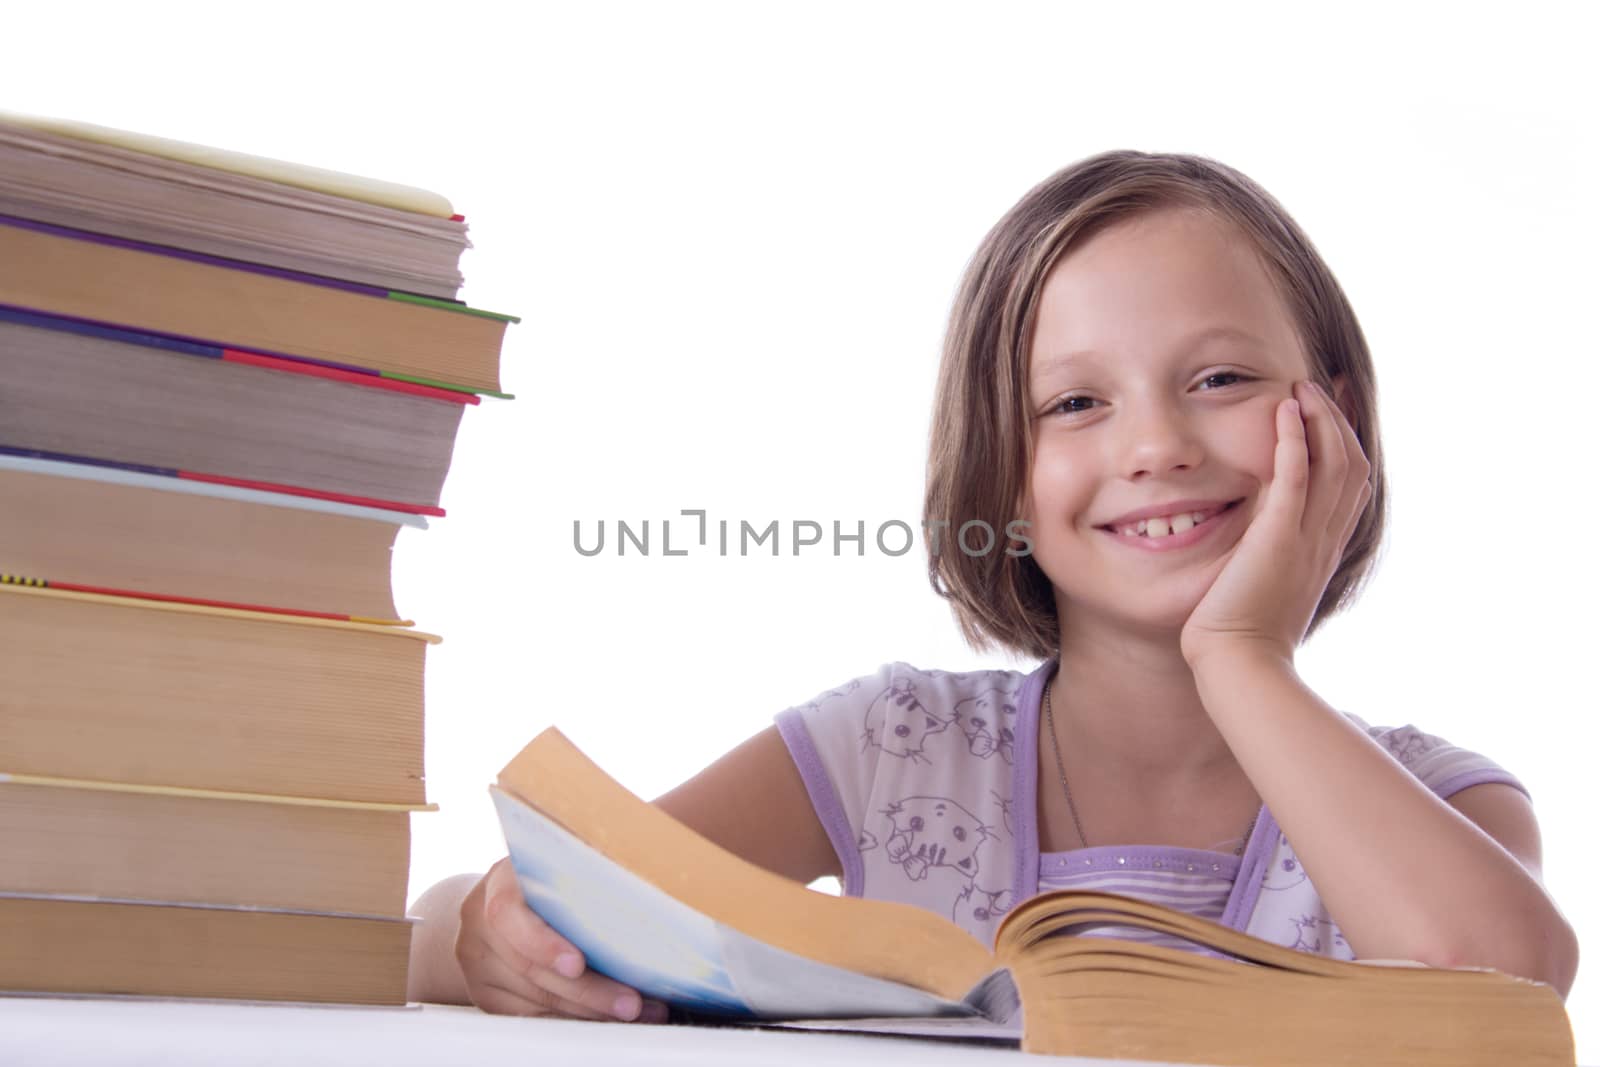 Smiling girl with pile of books isolated on white